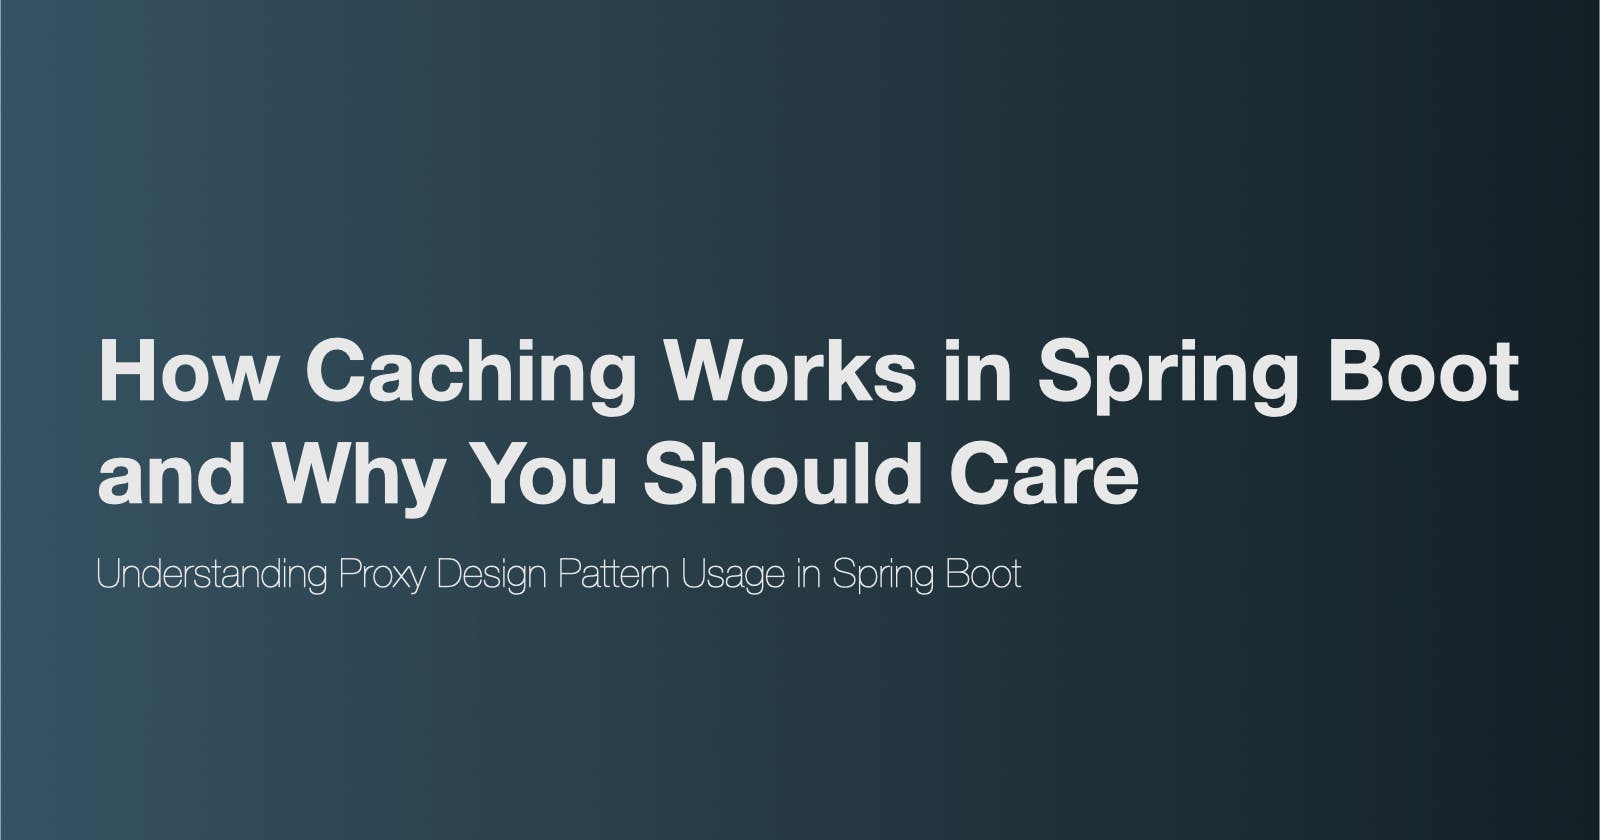 How Caching Works in Spring Boot and Why You Should Care